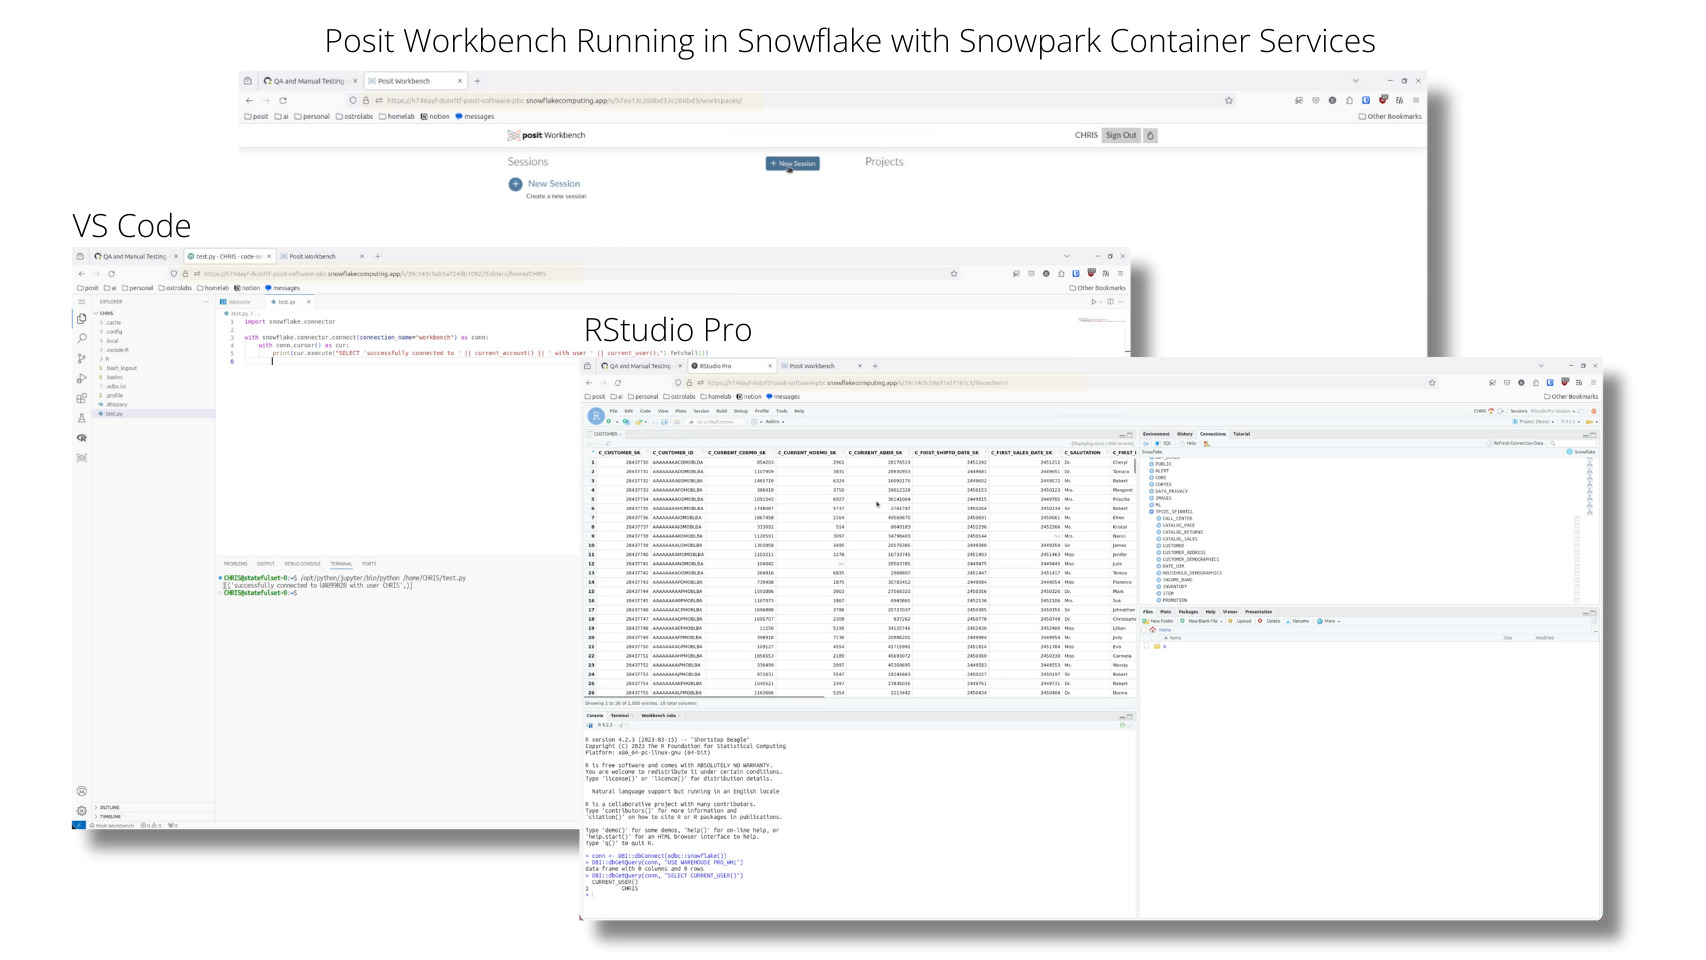 Posit Workbench on Snowpark Container Services, with the VS Code and RStudio IDE both snowing up in Snowflake URLs